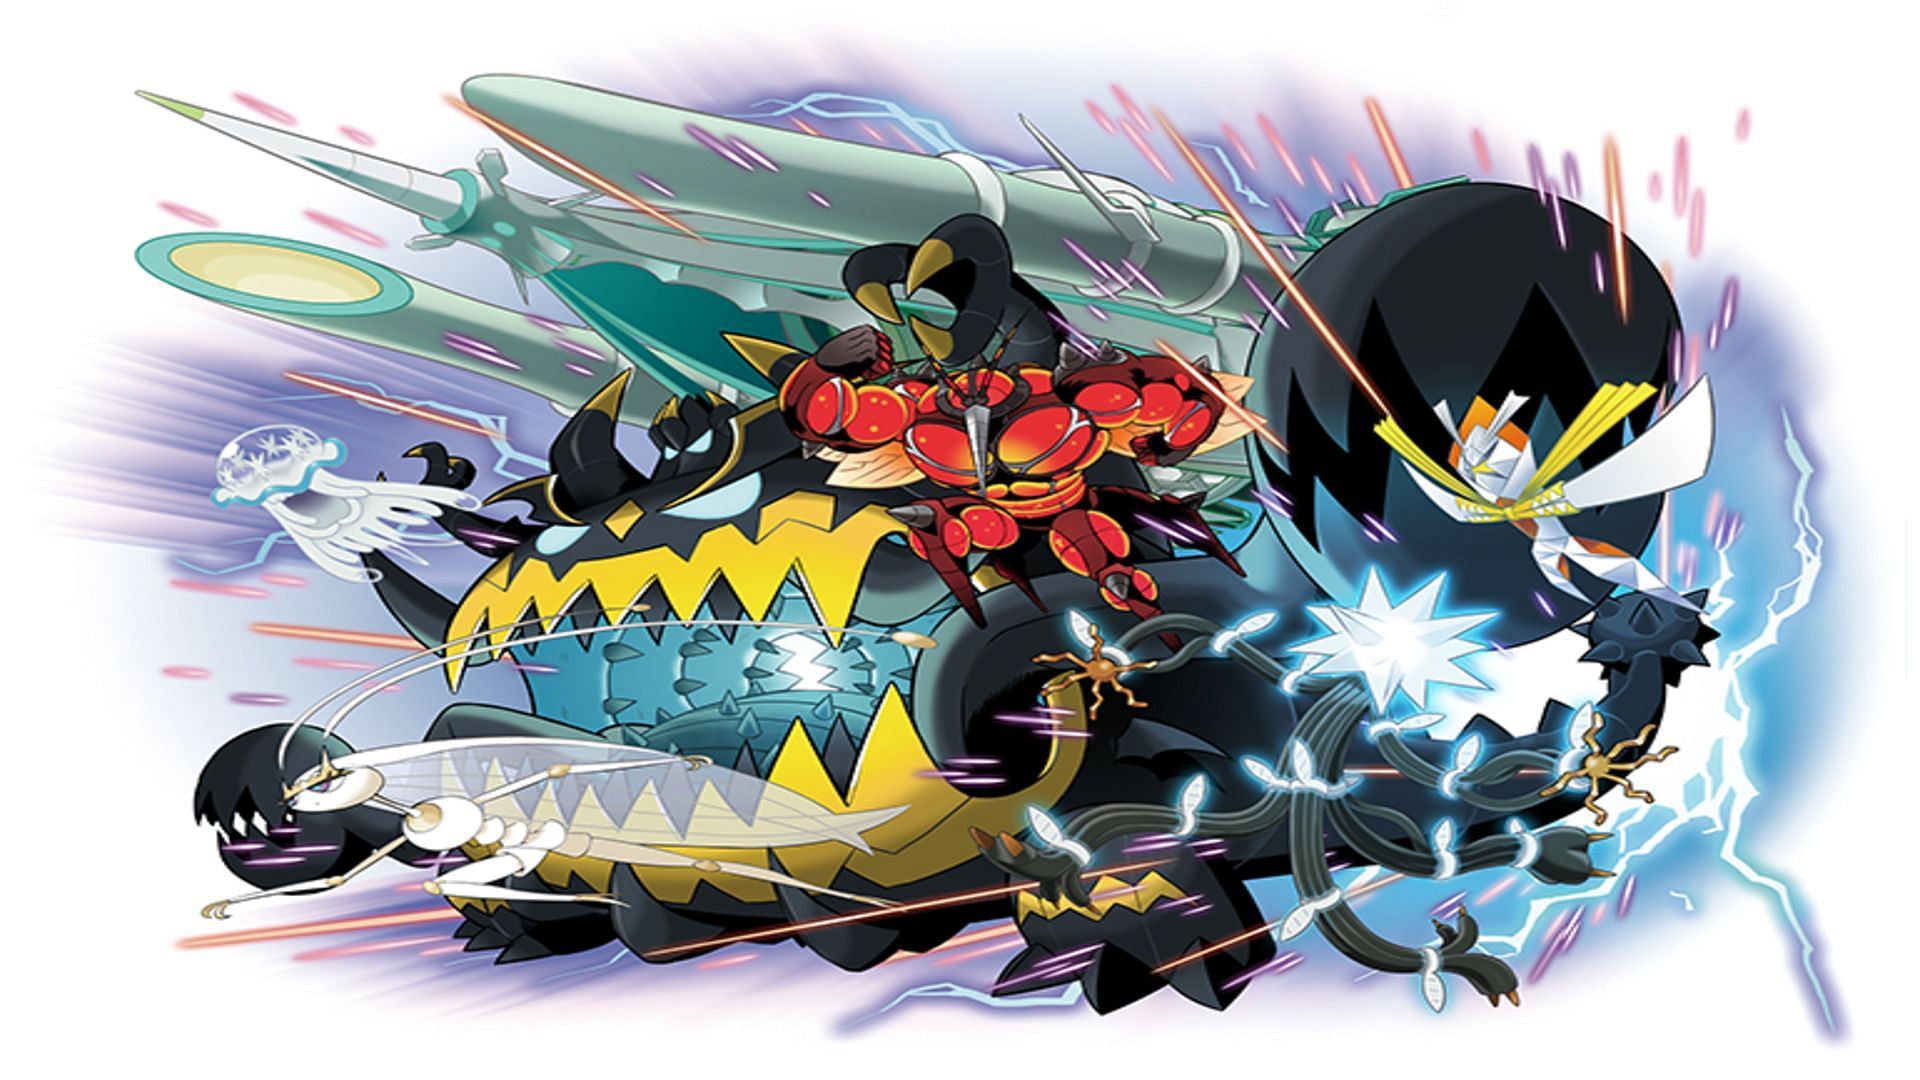 Official artwork for the Ultra Beasts